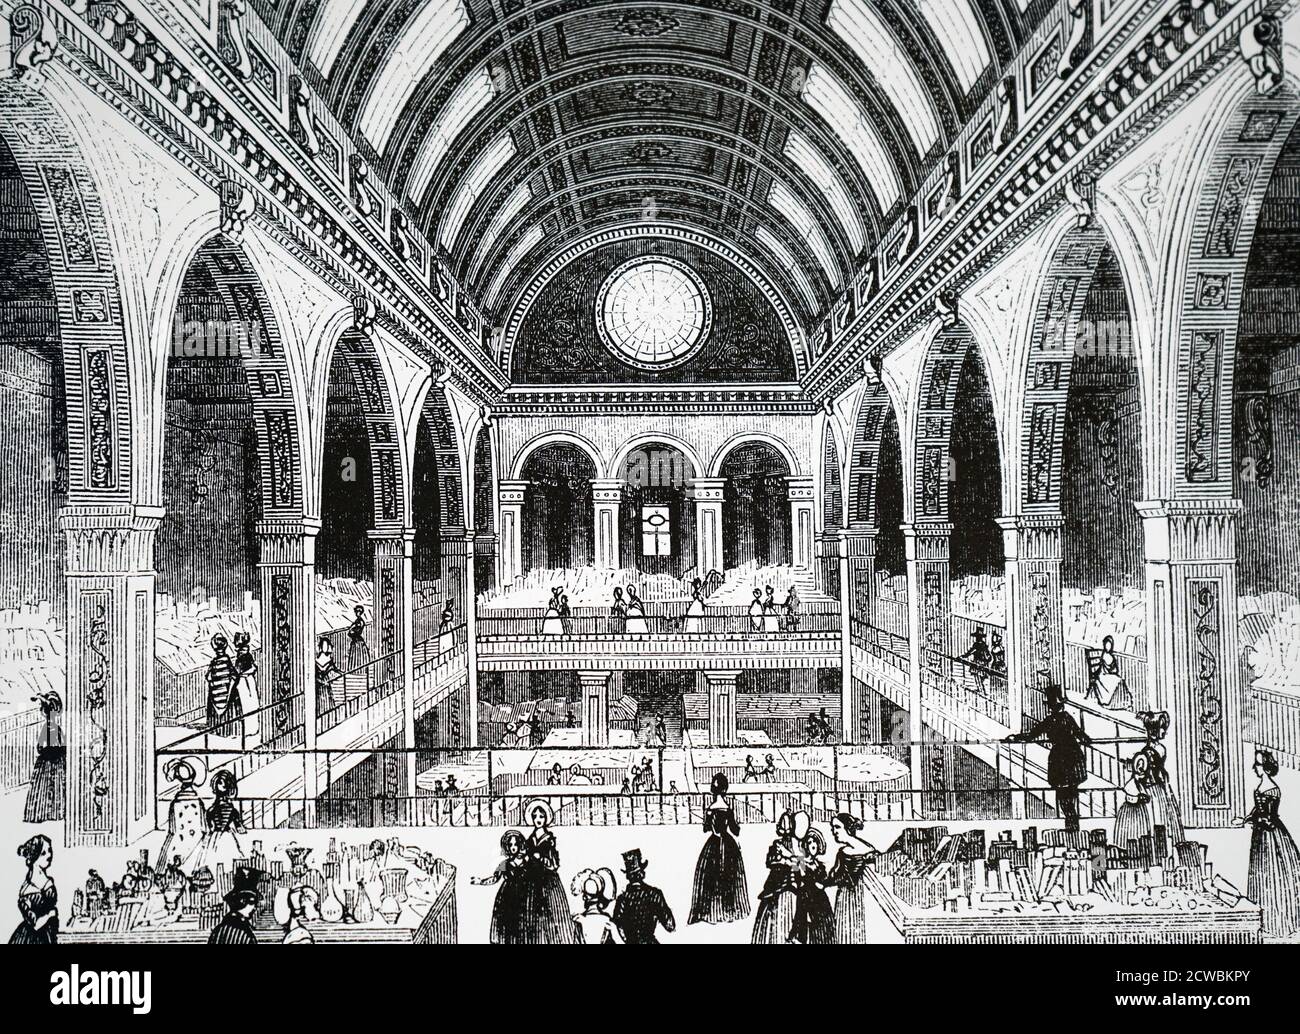 Engraving depicting the Pantheon Bazaar, Oxford Street, London. The first  floor was a picture gallery where items could be bought. The next floor,  shown in the picture, had counters for millinery, lace,